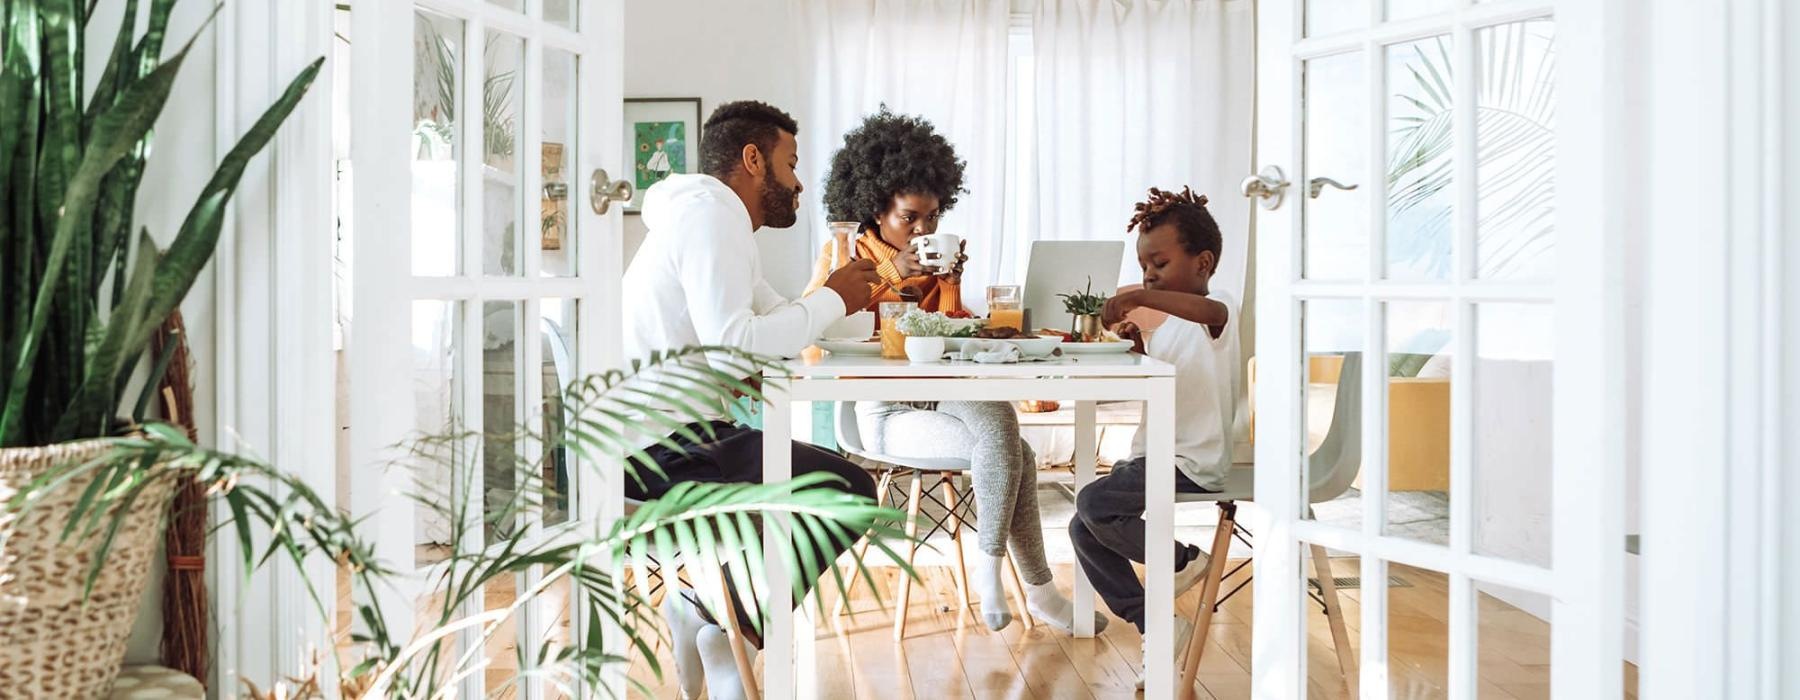 young family of three eat together at the breakfast table